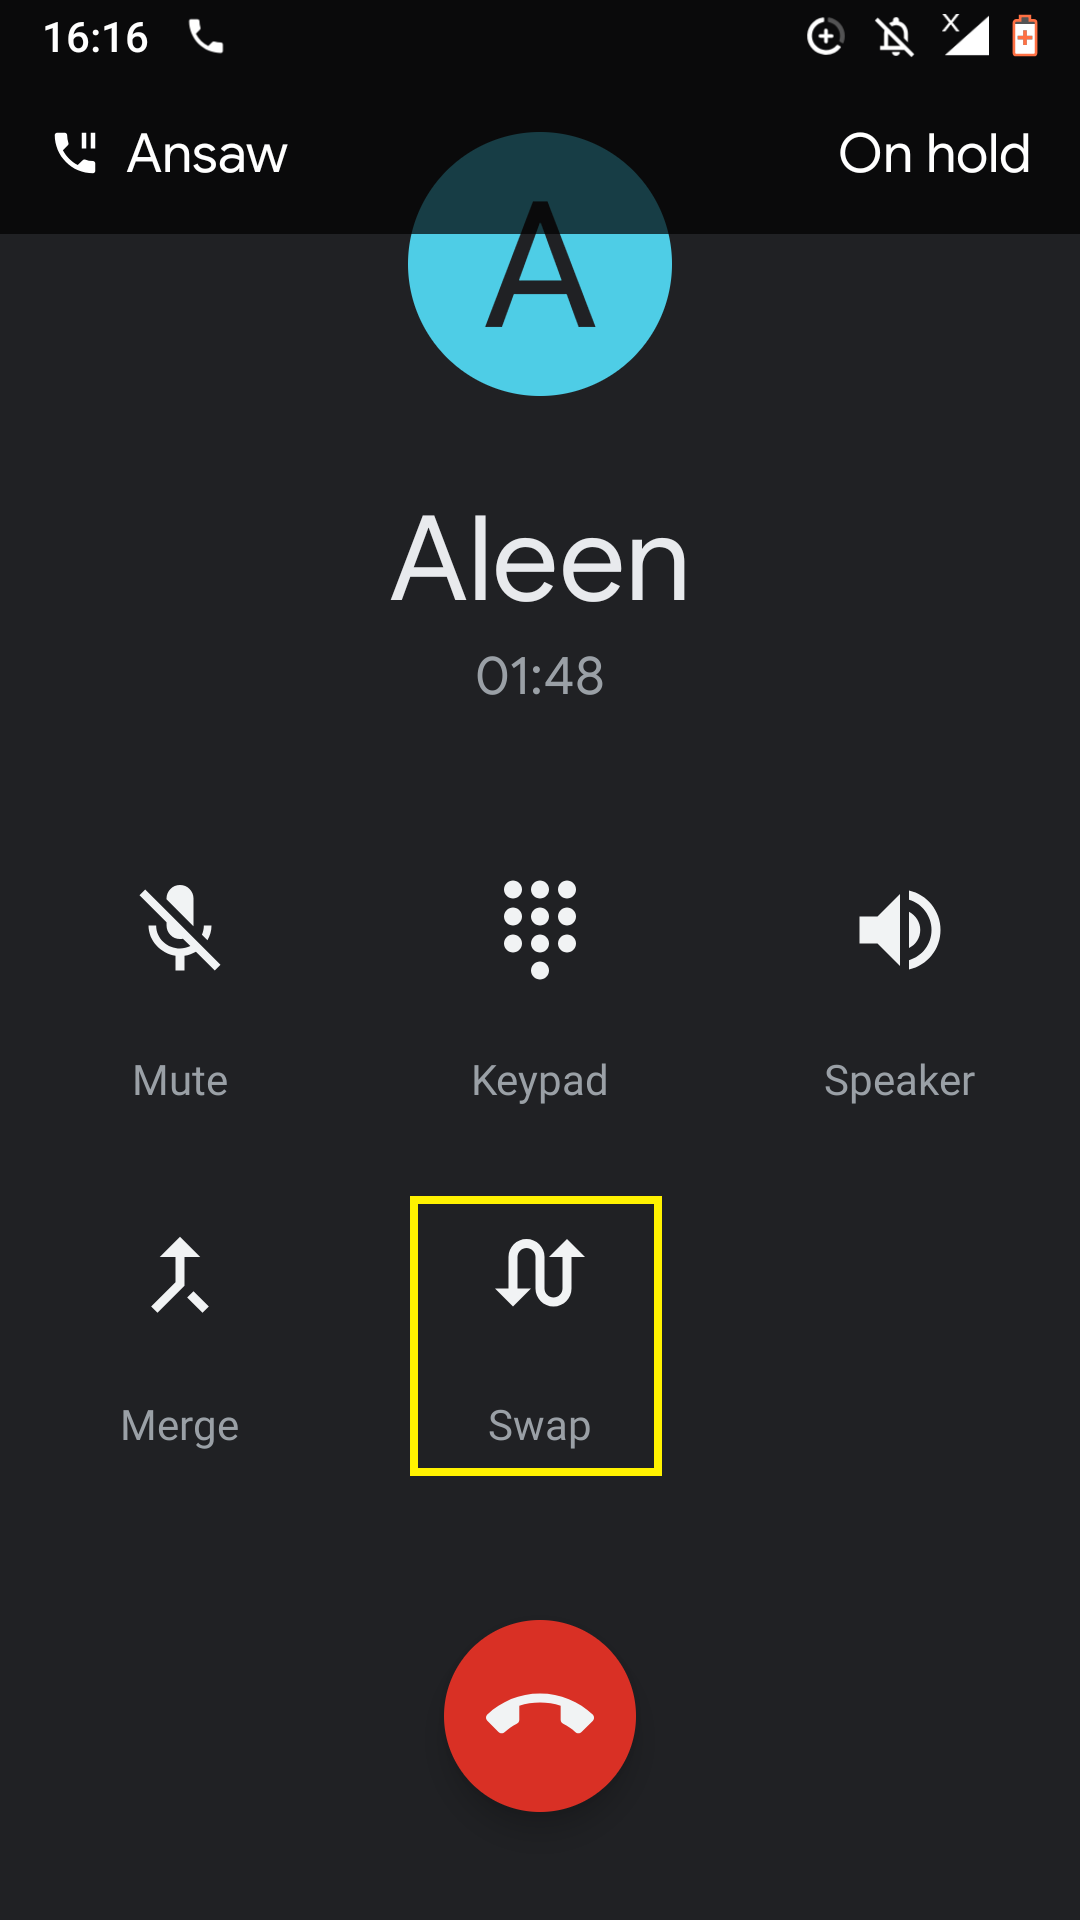 Making a conference call on Android in 8 easy steps.